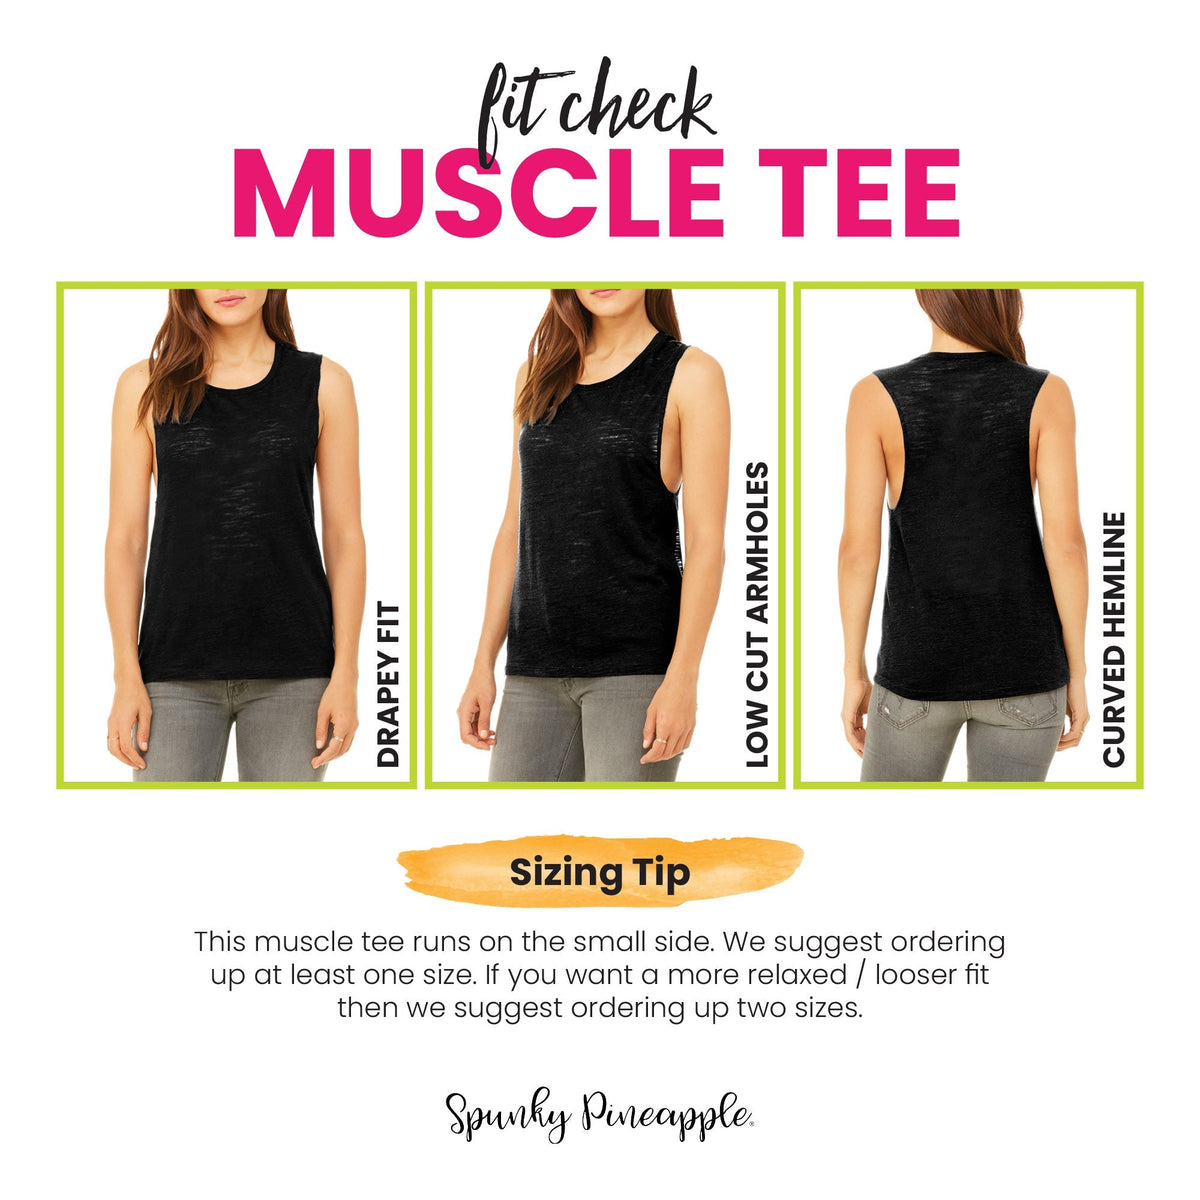 Sweating for My Sanity Muscle Tee